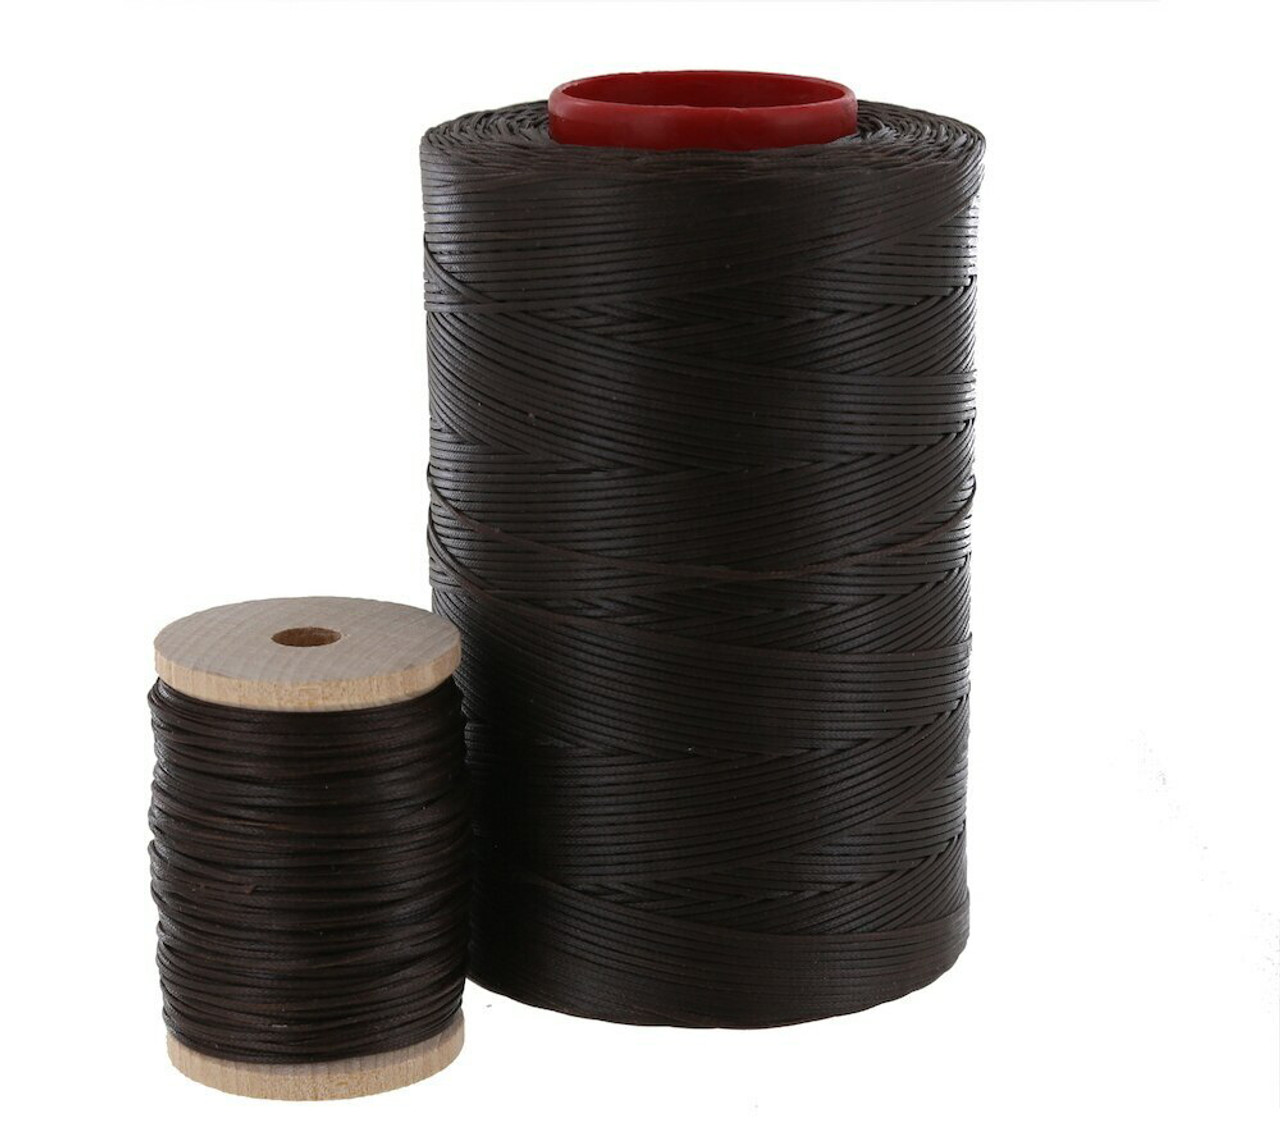 Tiger Polyester Braided Waxed Thread - UK Supplier –